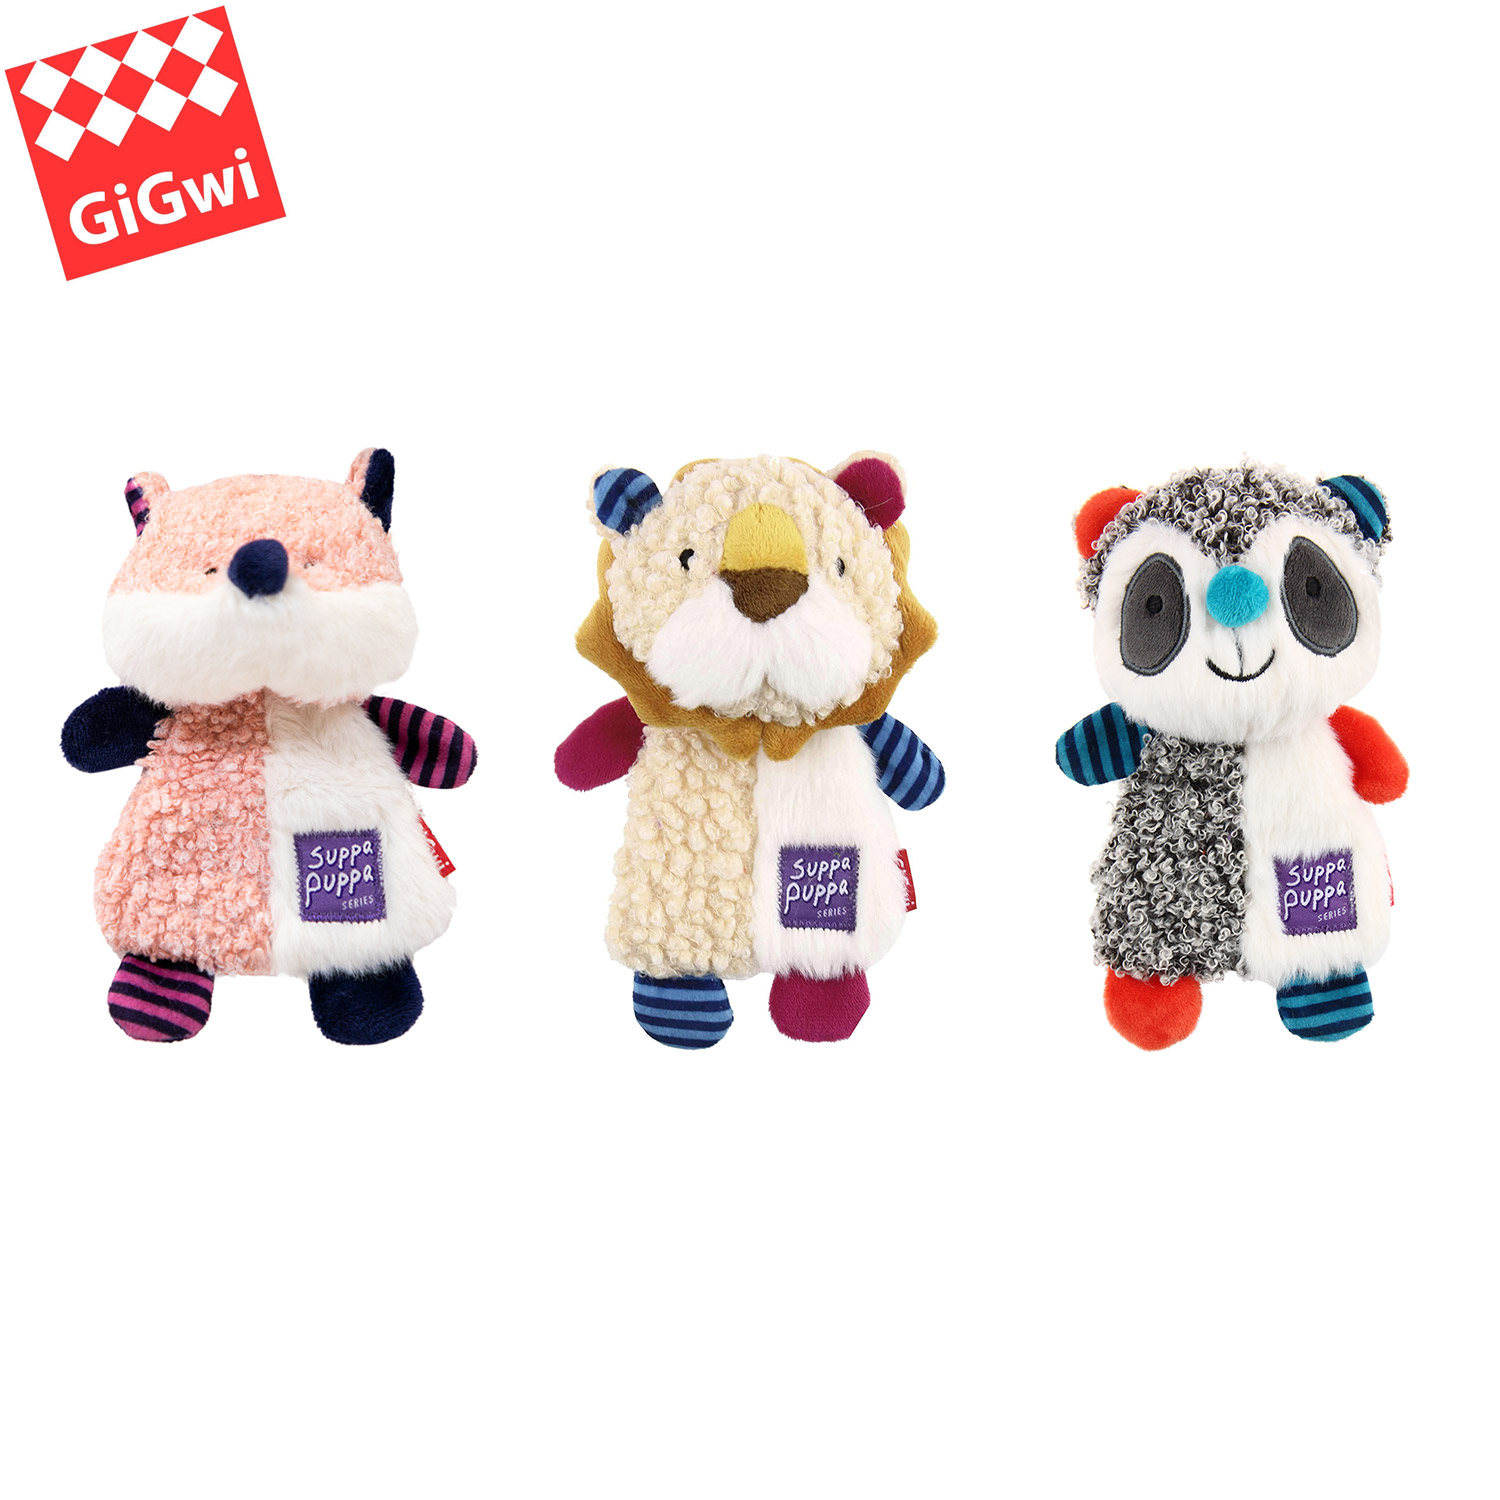 GiGwi Suppa Puppa - an ideal to fetch, snuggle, or chew. charming designs made from quality, non-toxic materials